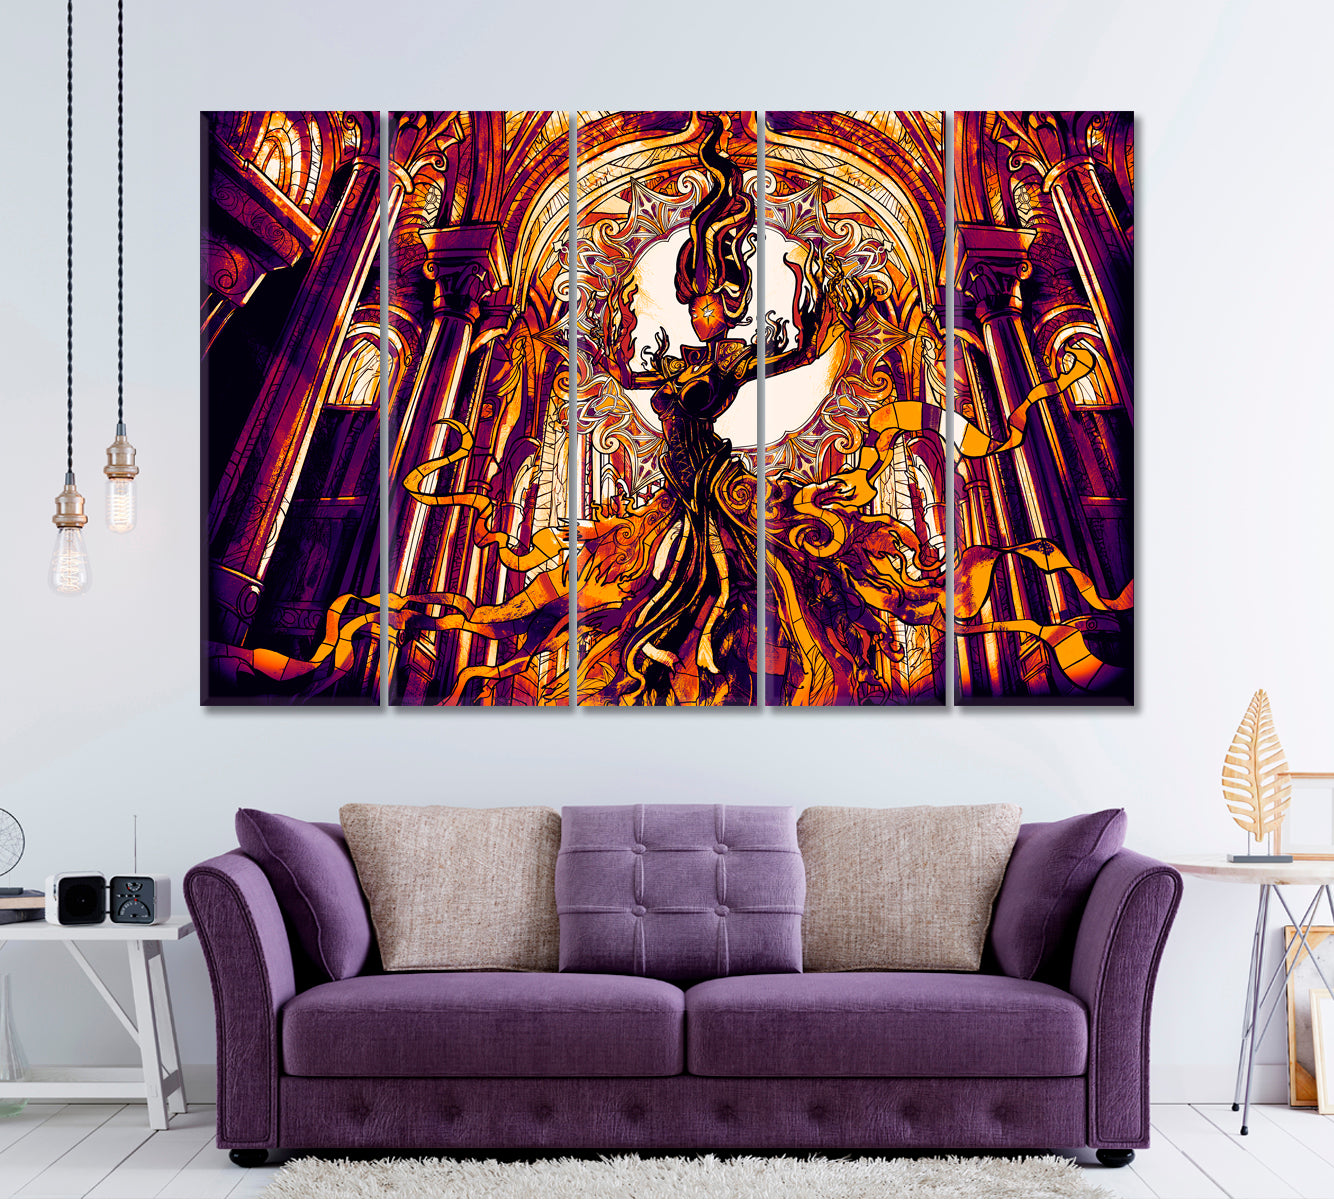 FANTASY Girl Hovers Majestic Cathedral Surreal Fantasy Large Art Print Décor Artesty 5 panels 36" x 24" 